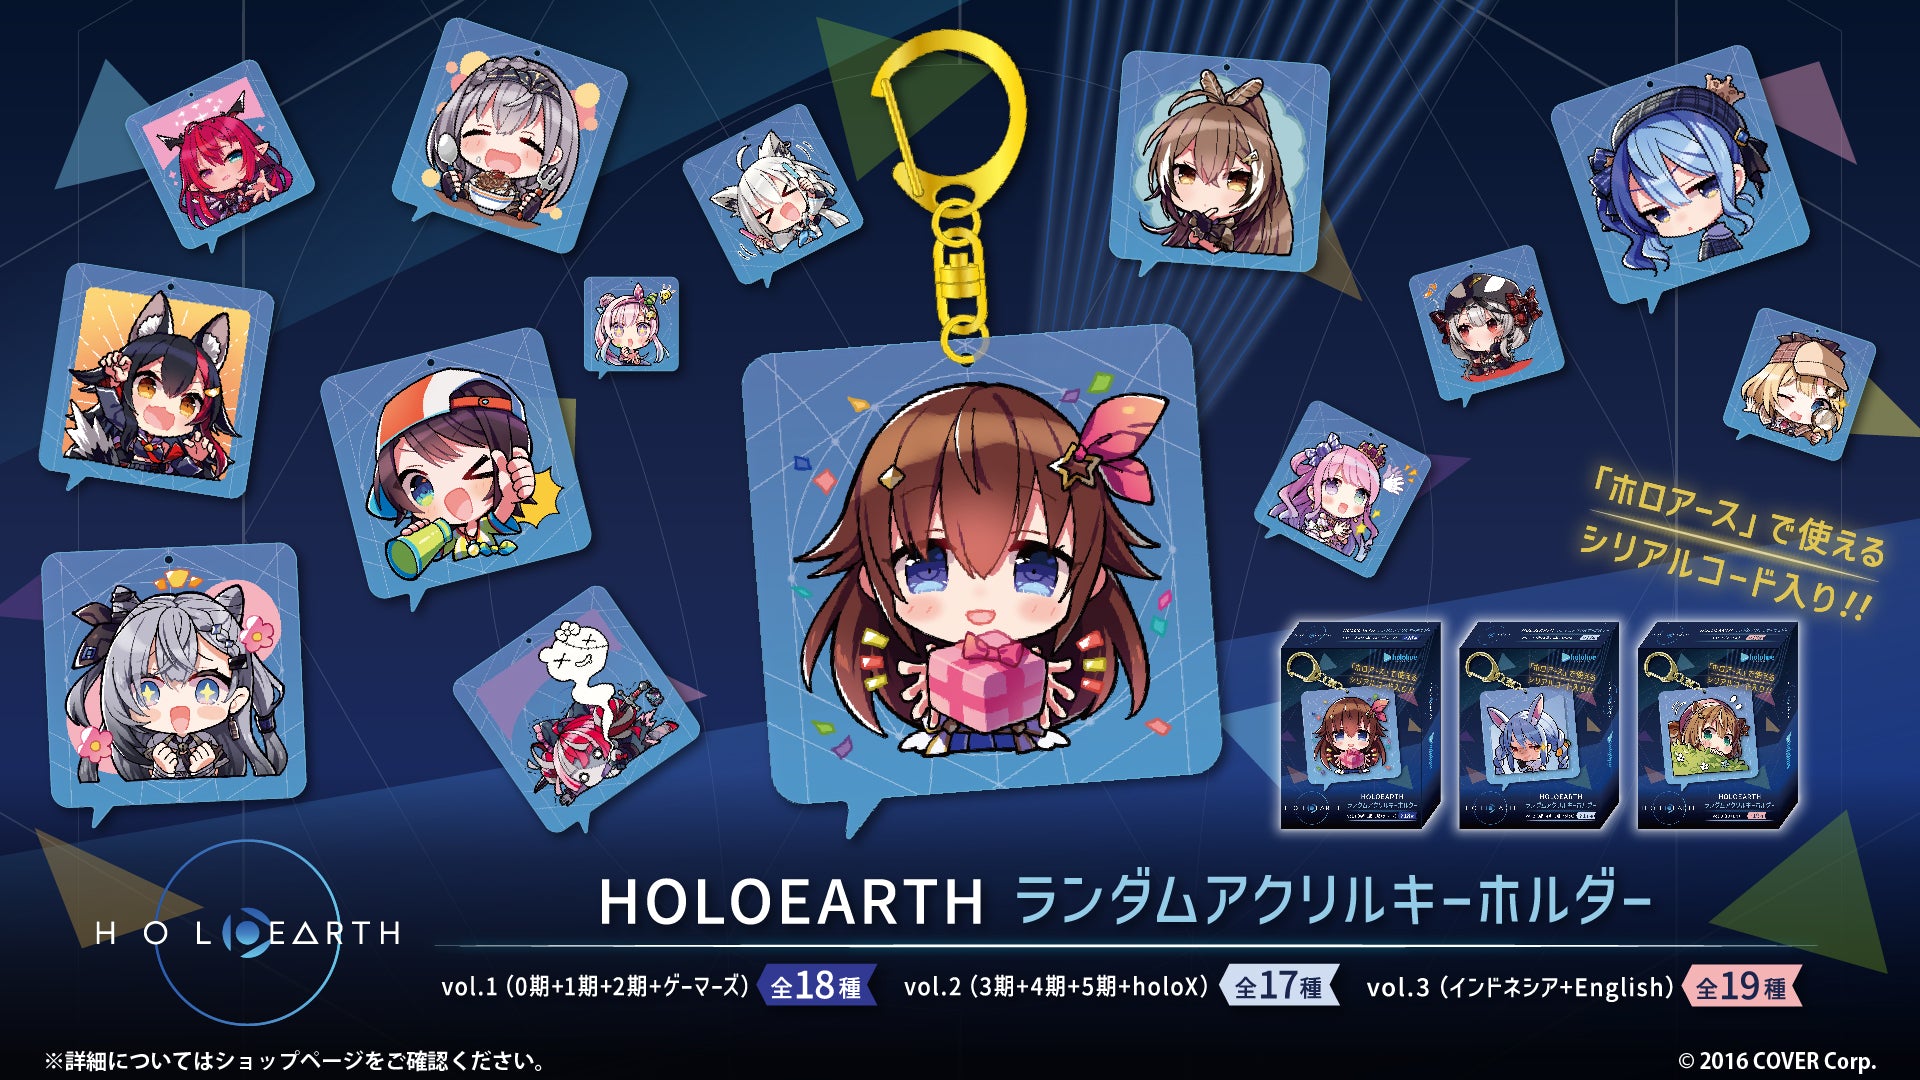 hololive production OFFICIAL SHOP [ホロライブプロダクション公式